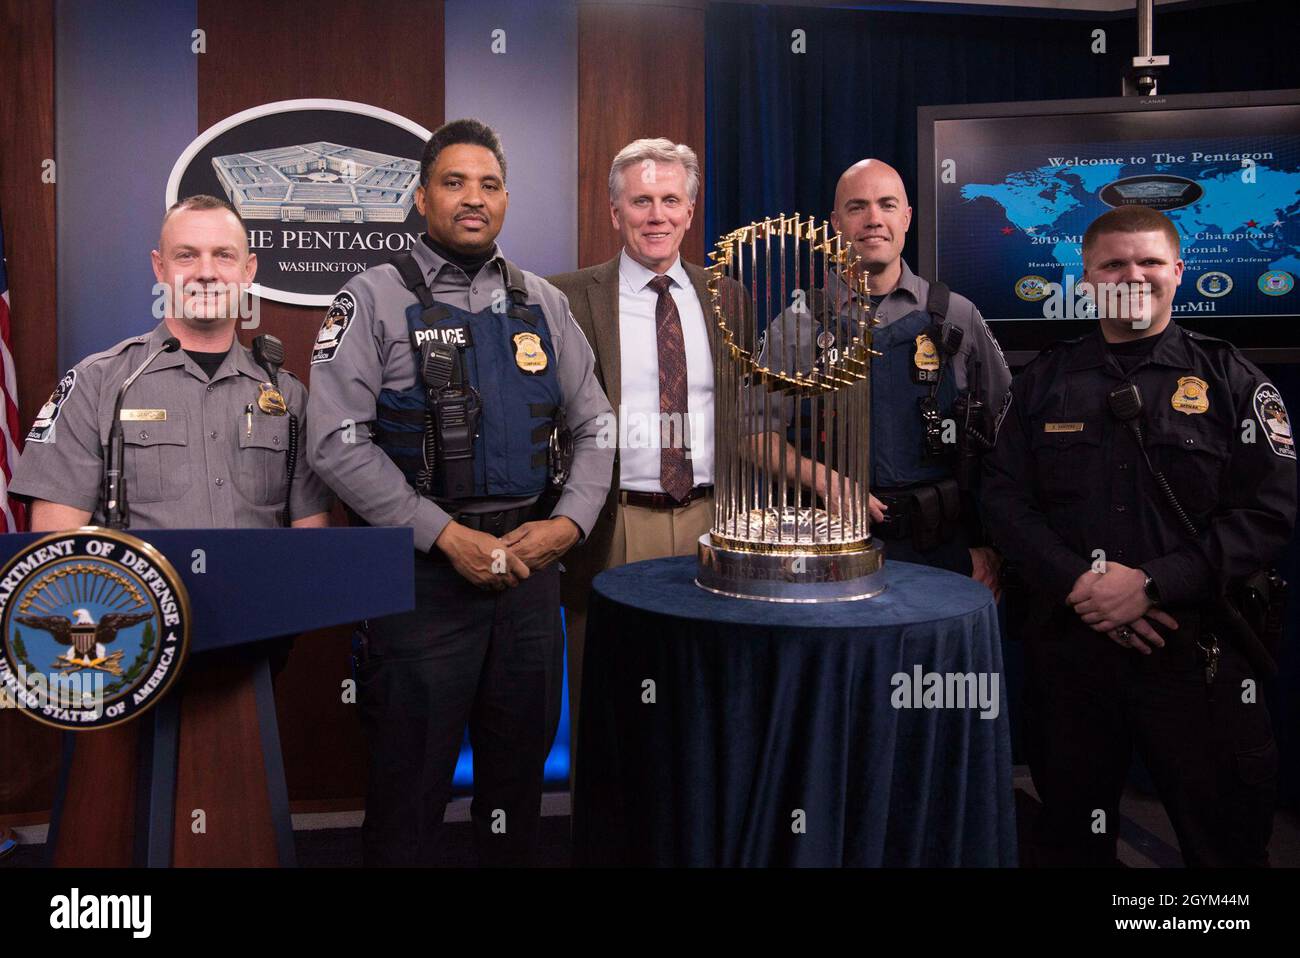 Principal Deputy Assistant to the Secretary of Defense for Public Affairs Charles E. Summers Jr. and Pentagon Police Officers pose with the Washington Nationals' 2019-2020 World Series Cup, at the Pentagon, Washington, D.C., Jan. 27, 2020. (DoD photo by Navy Petty Officer 2nd Class James K. Lee) Stock Photo